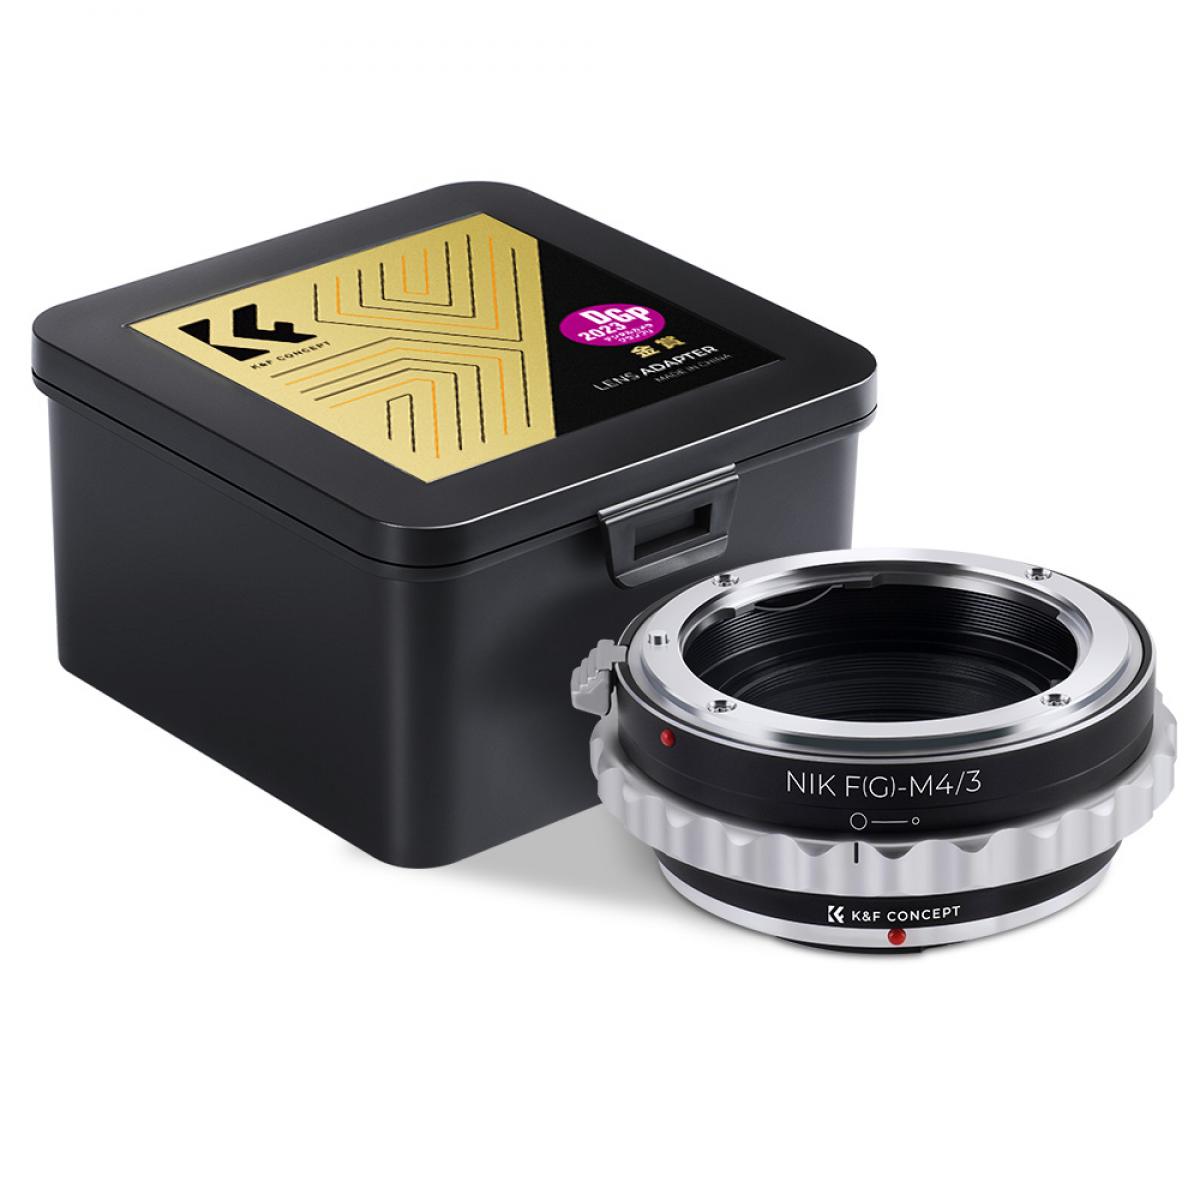 AI(G) to M4/3 Lens Mount Adapter with Aperture Control Ring